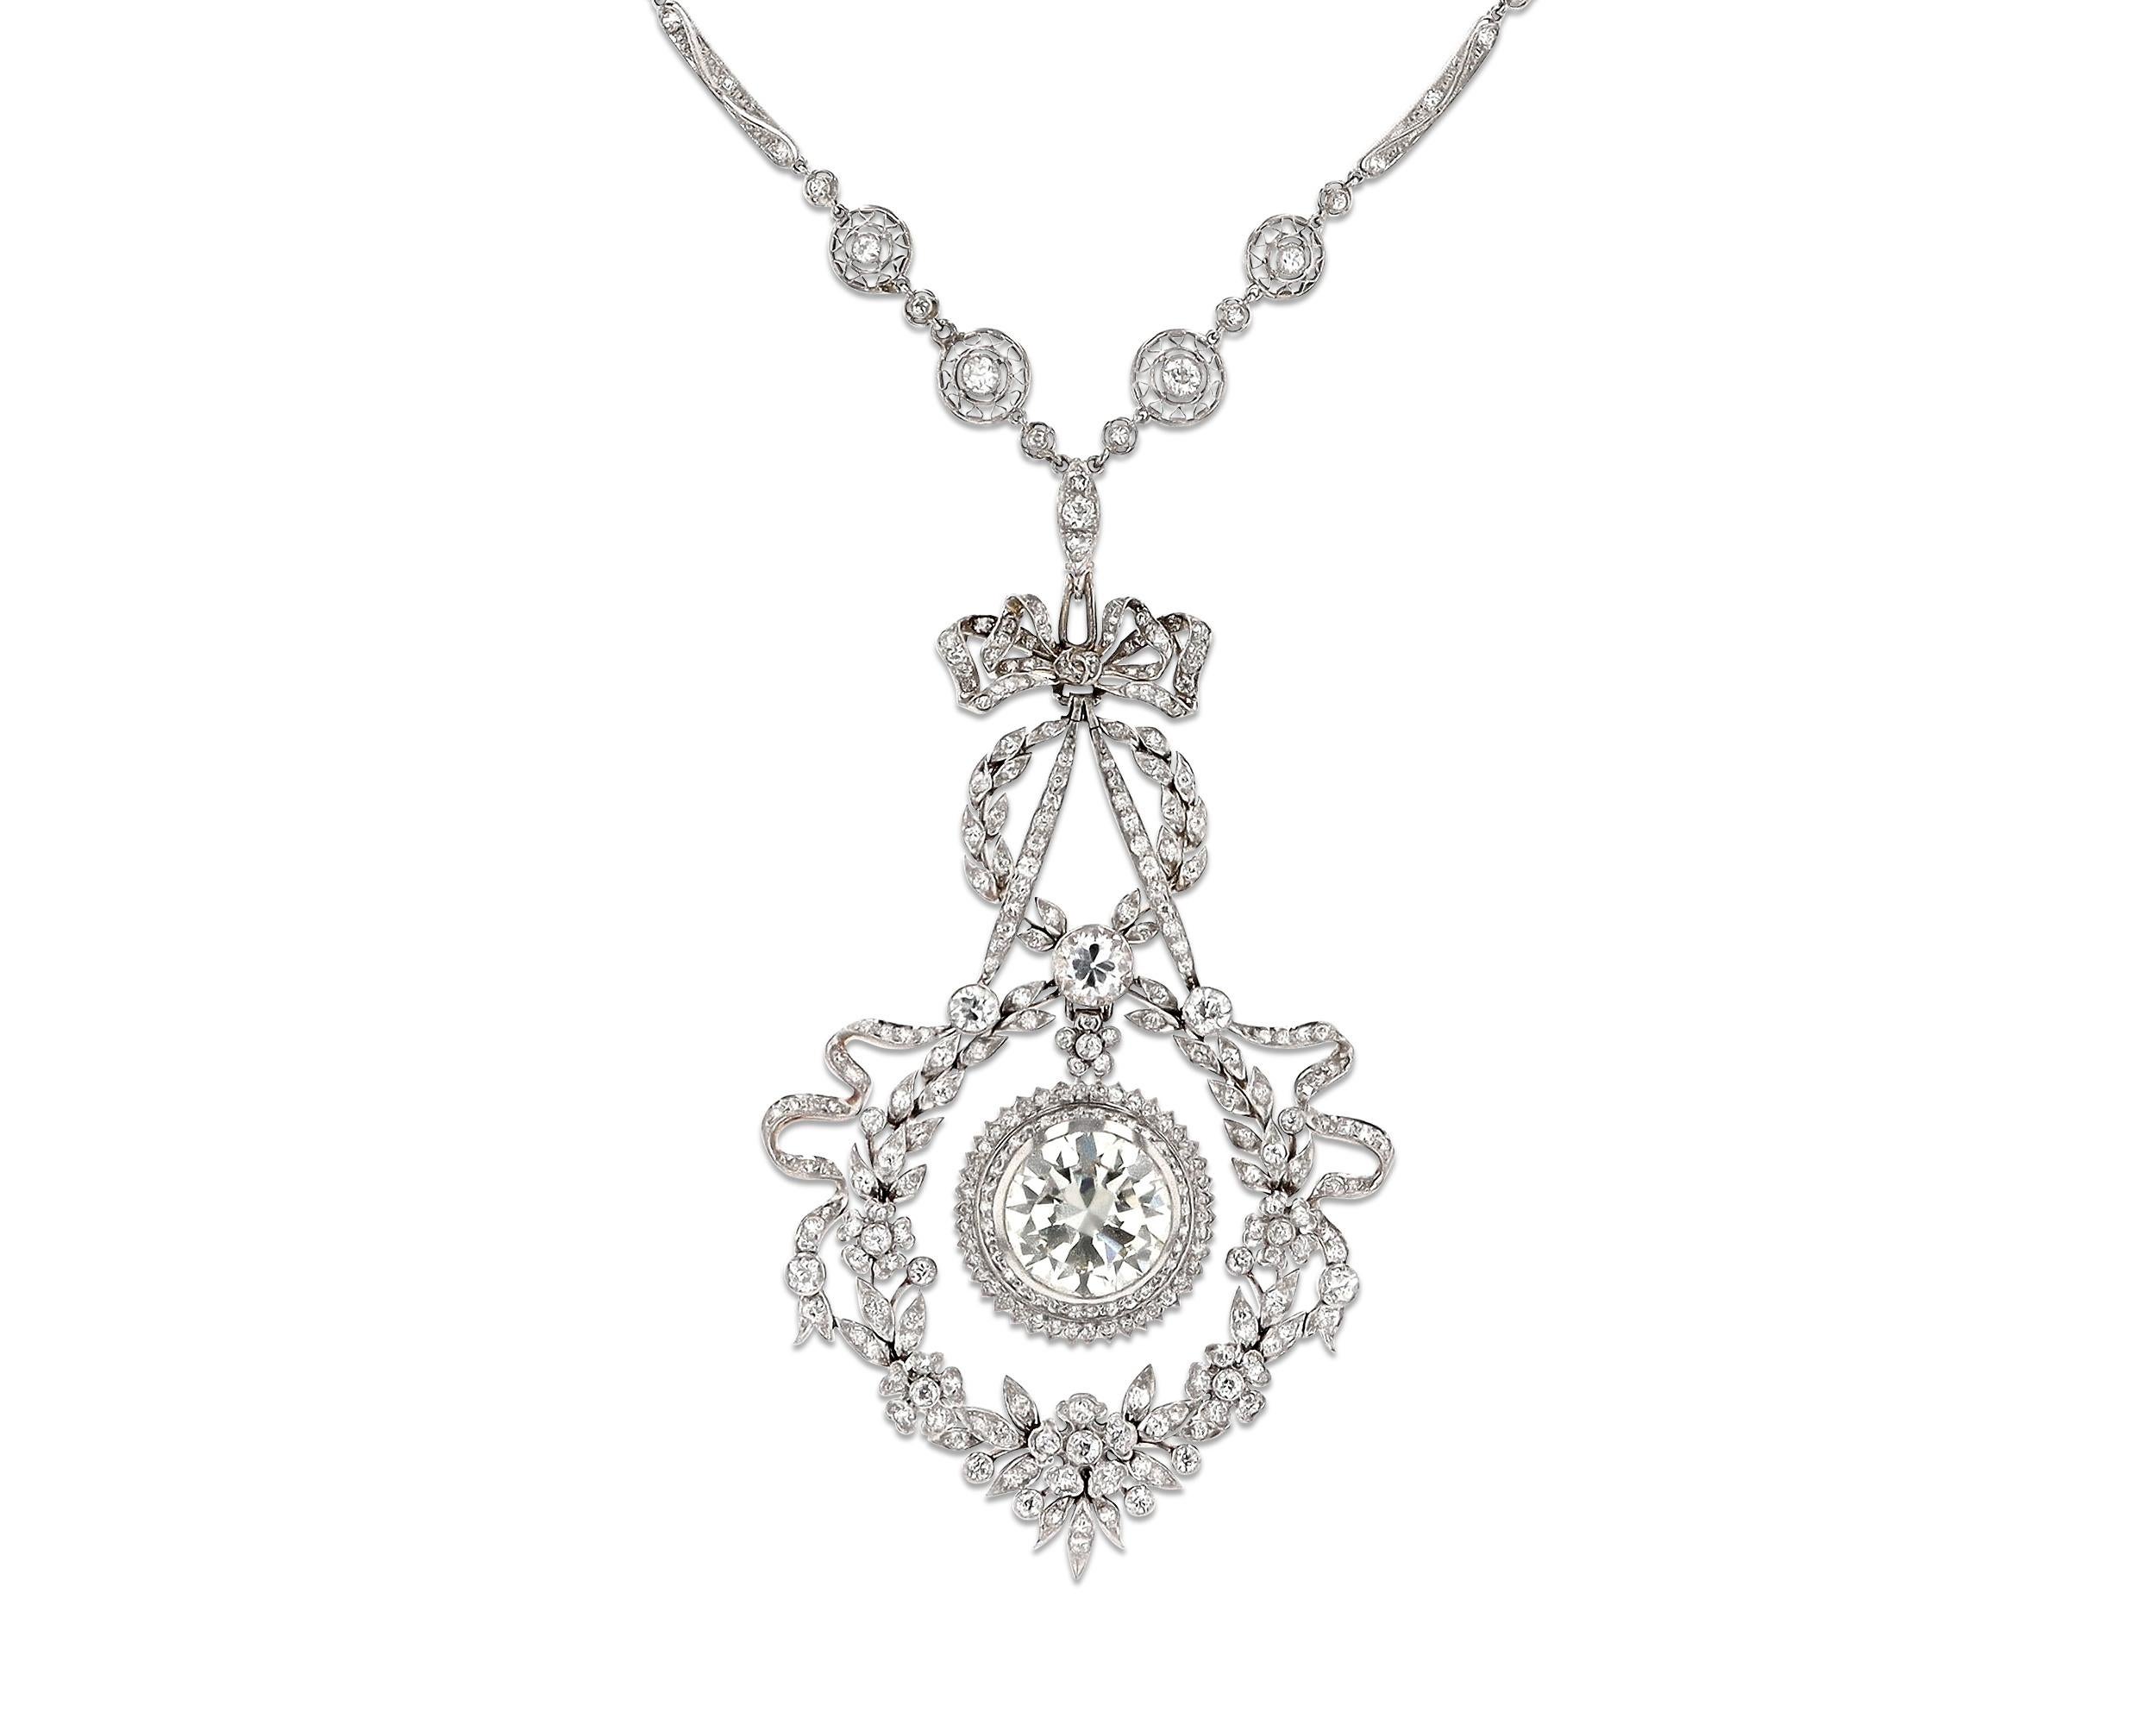 Adorned by diamonds totaling approximately 13.60 carats, this Edwardian-style necklace by J.E. Caldwell exhibits a classic elegance. A round white diamond weighing approximately 6.85 carats rests at its center; it is surrounded by floral vignettes